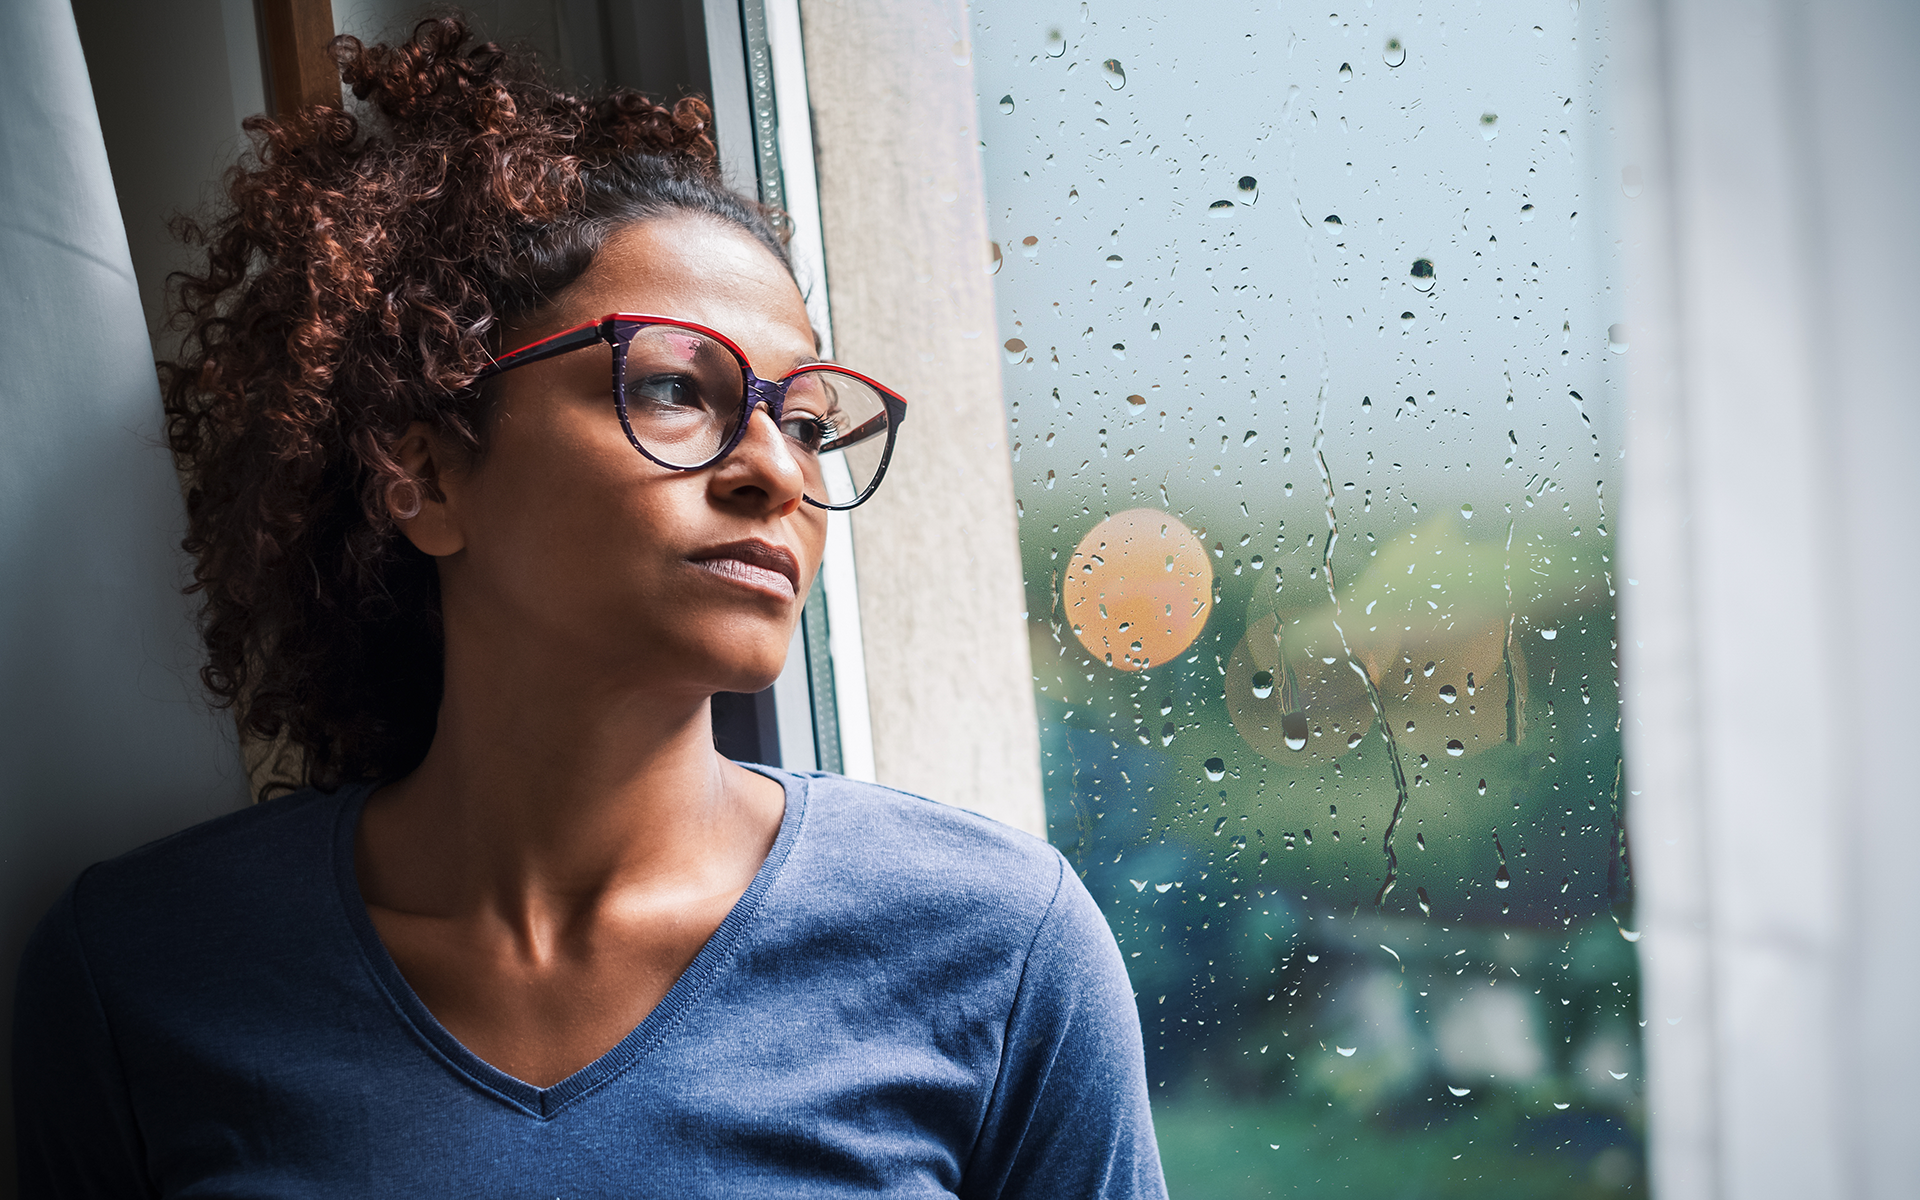 Does Mindfulness Decrease Feelings of Guilt?—Photo of a Black woman wearing glasses and a blue shirt looking out a window at a rainy day.